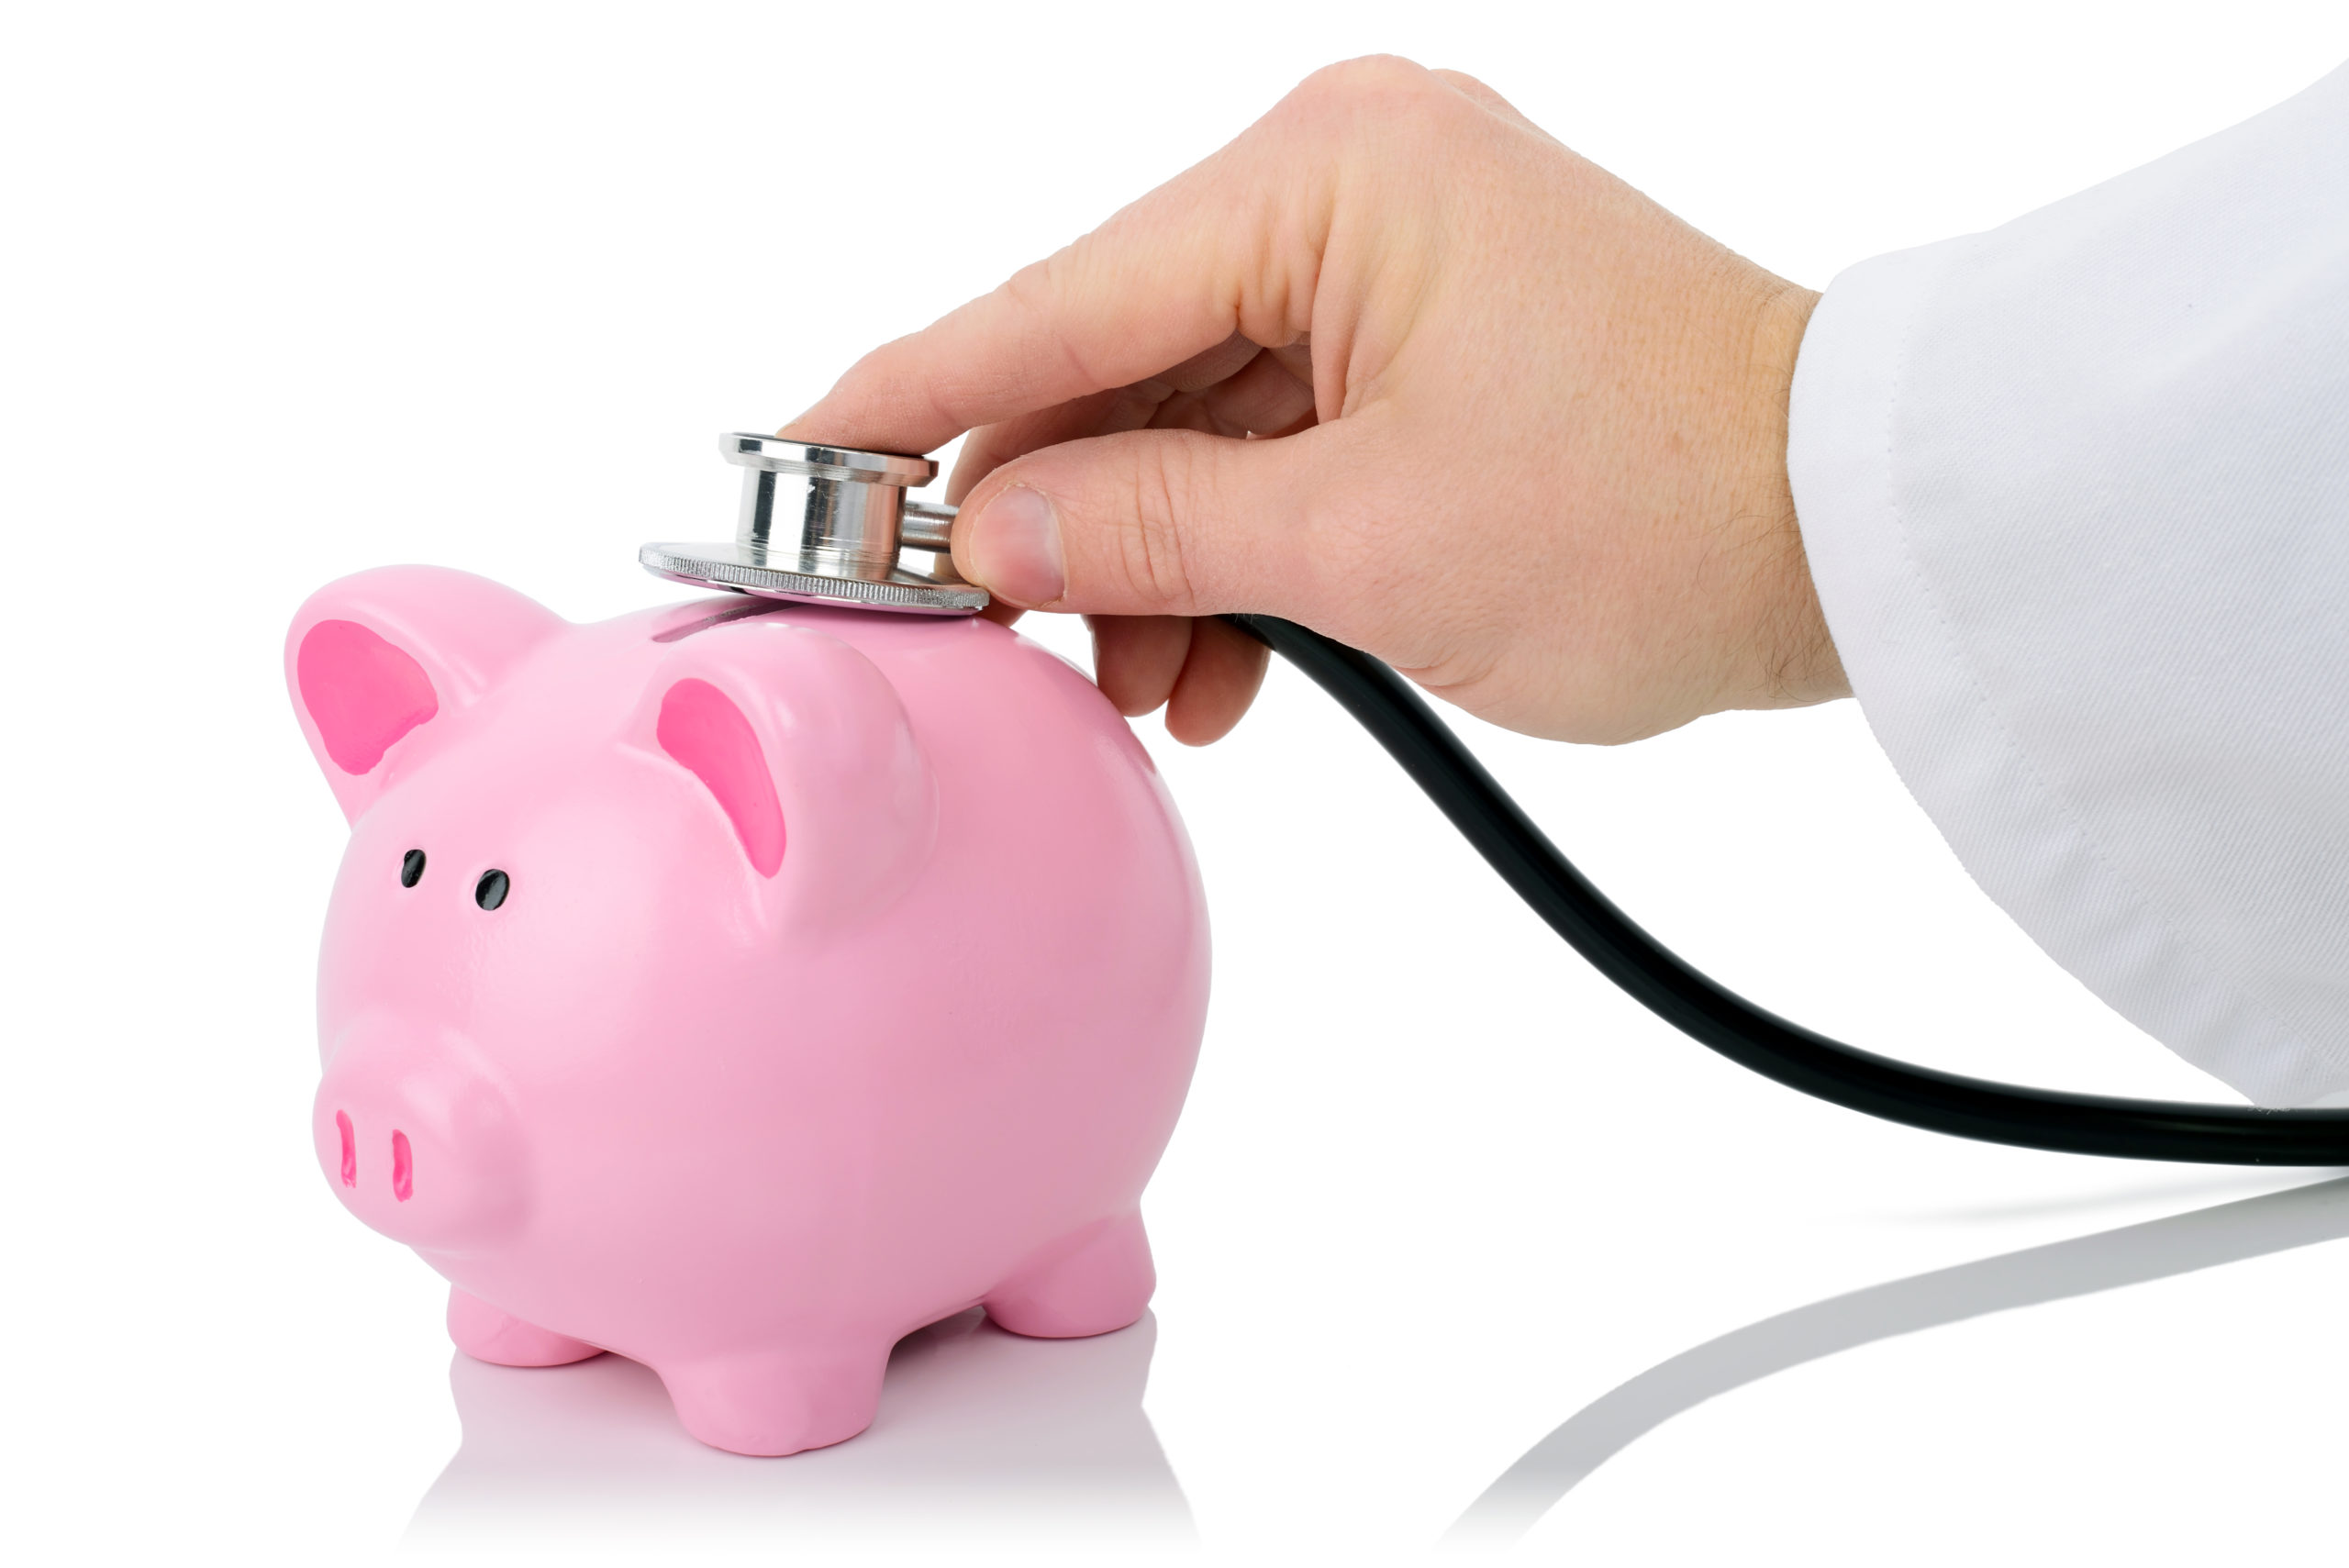 Stethoscope Checking Financial Health of Piggy Bank